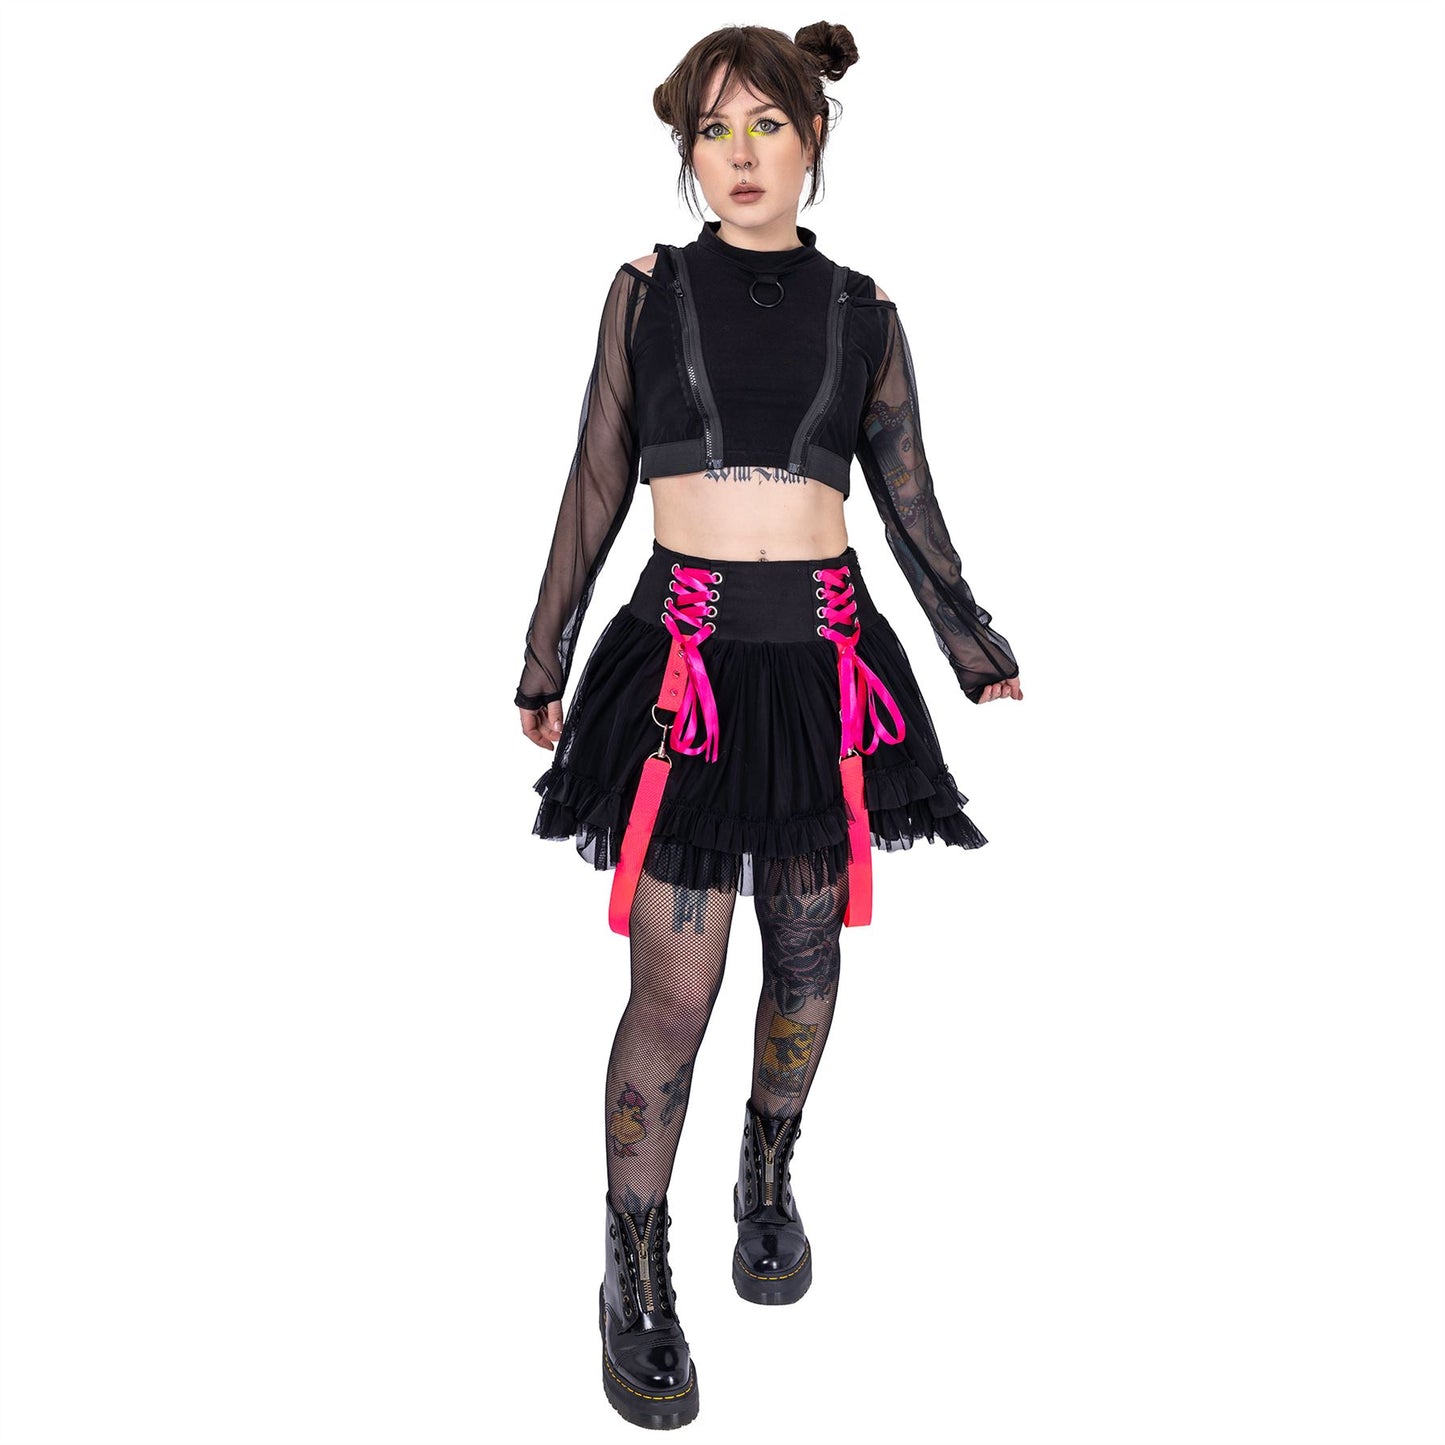 CHAOTIC SKIRT - BLACK/PINK